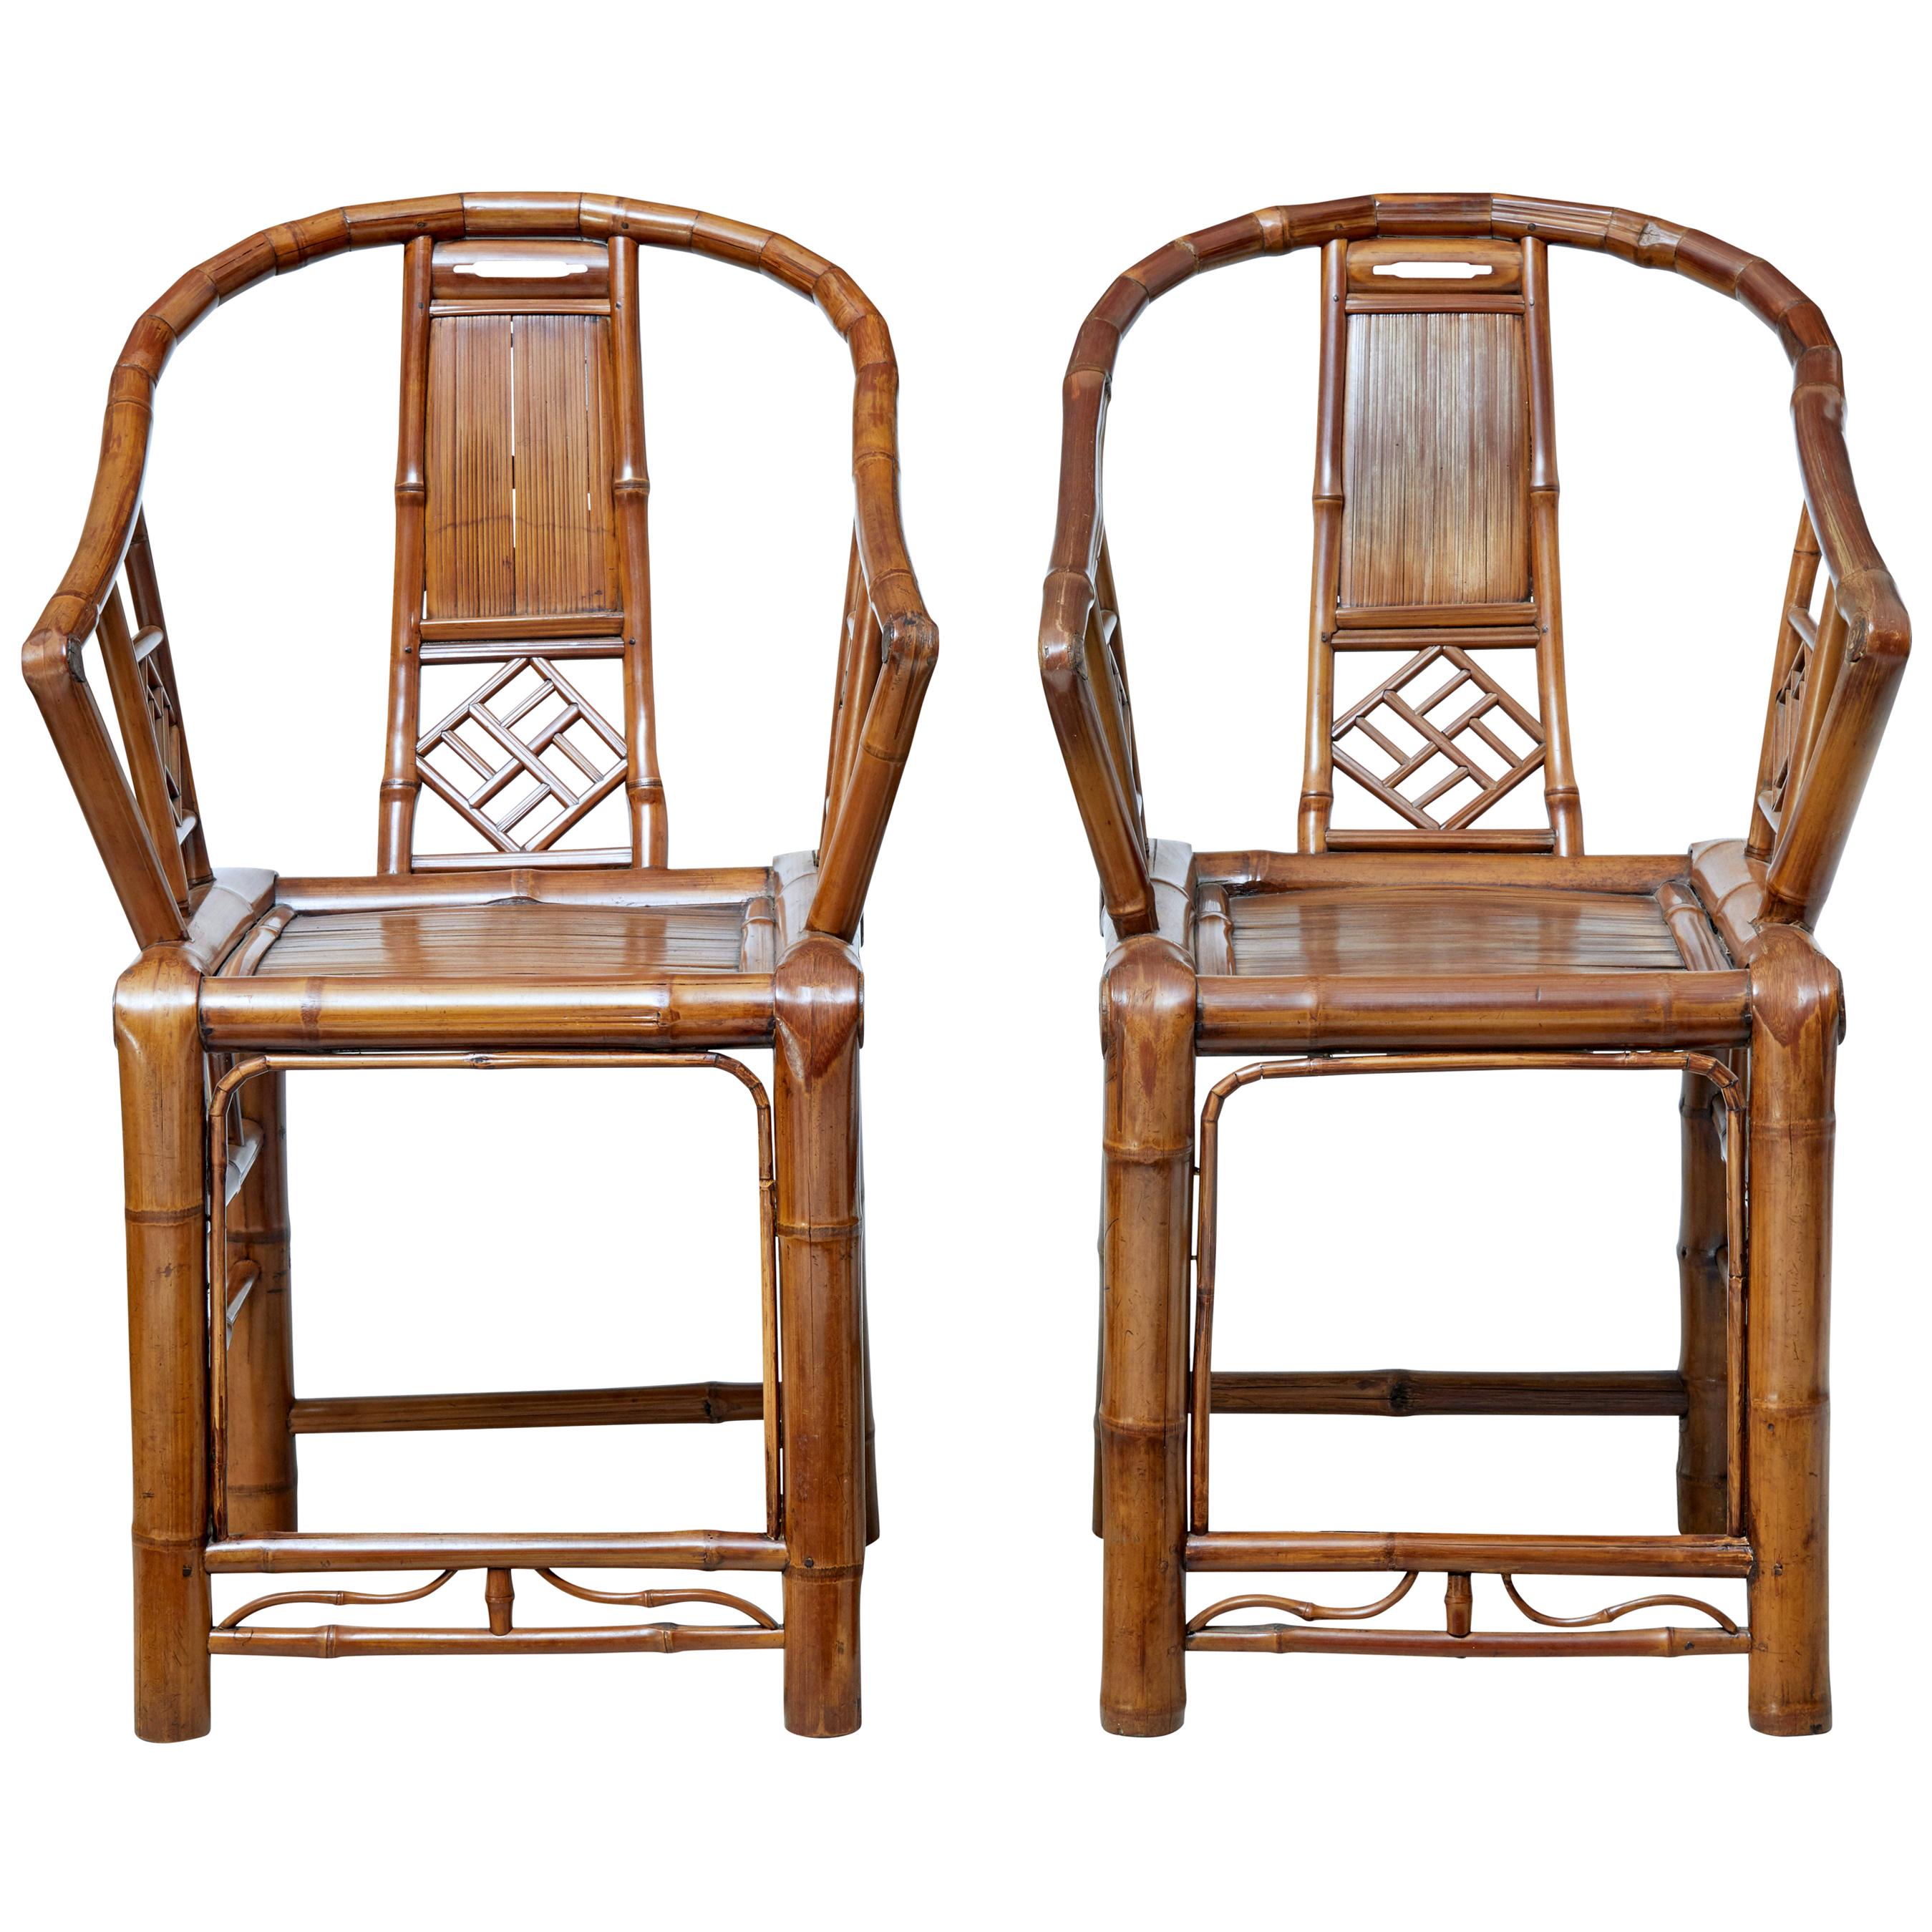 Pair of Early 20th Century Chinese Bamboo Armchairs